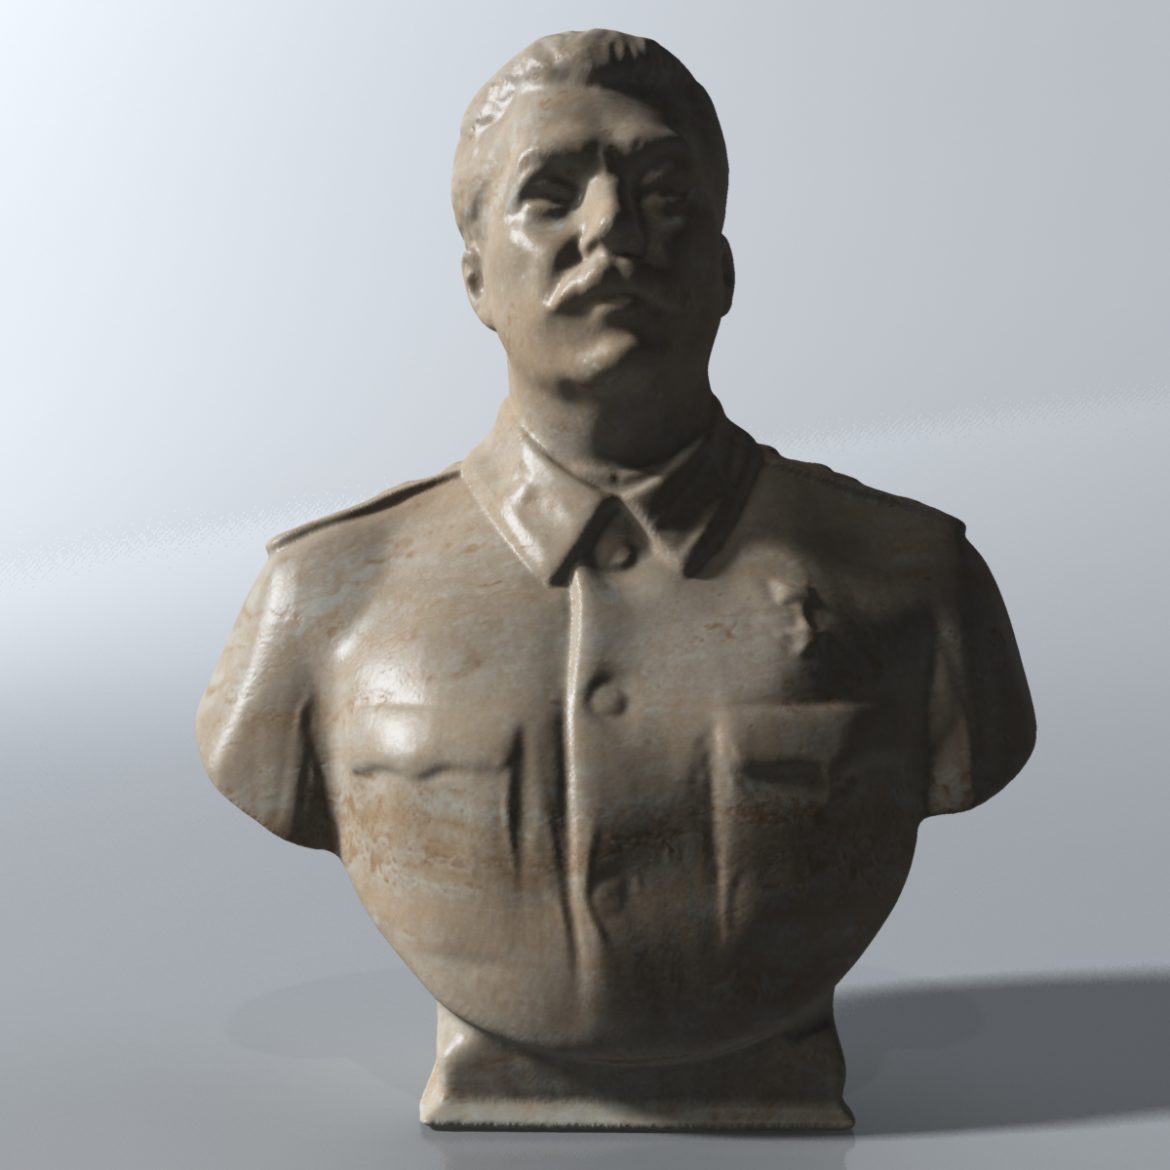  <a class="continue" href="https://www.flatpyramid.com/3d-models/characters-3d-models/human-types/vip-and-celebrities/historical/staline-bust/">Continue Reading<span> Staline Bust</span></a>